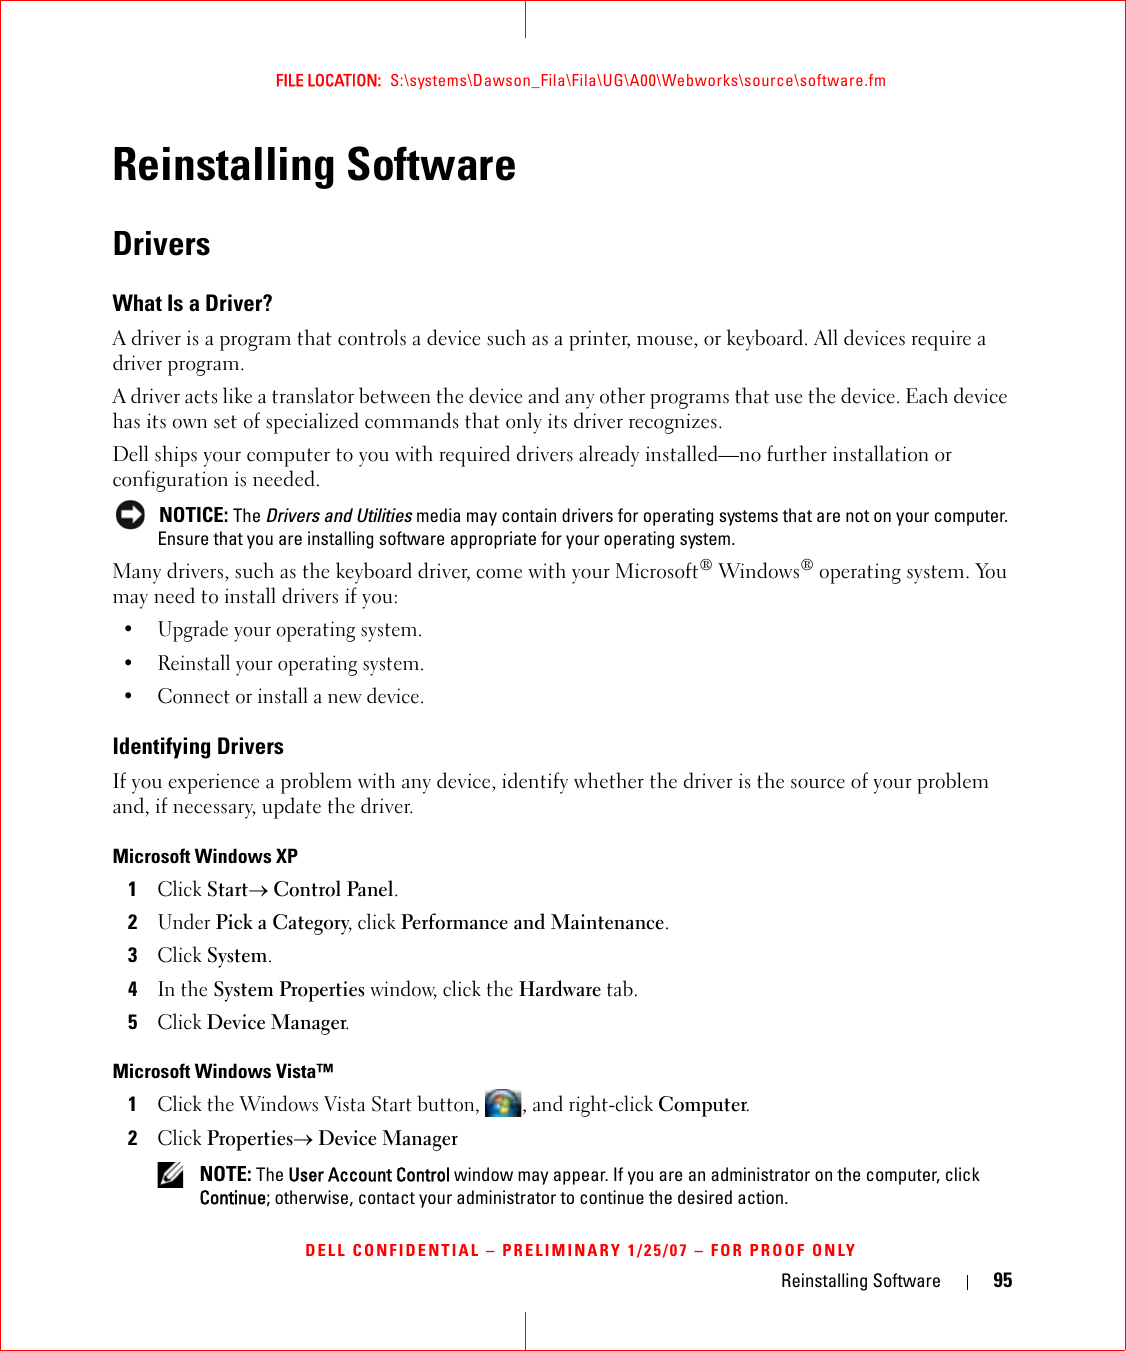 Reinstalling Software 95FILE LOCATION:  S:\systems\Dawson_Fila\Fila\UG\A00\Webworks\source\software.fmDELL CONFIDENTIAL – PRELIMINARY 1/25/07 – FOR PROOF ONLYReinstalling SoftwareDriversWhat Is a Driver?A driver is a program that controls a device such as a printer, mouse, or keyboard. All devices require a driver program.A driver acts like a translator between the device and any other programs that use the device. Each device has its own set of specialized commands that only its driver recognizes.Dell ships your computer to you with required drivers already installed—no further installation or configuration is needed. NOTICE: The Drivers and Utilities media may contain drivers for operating systems that are not on your computer. Ensure that you are installing software appropriate for your operating system.Many drivers, such as the keyboard driver, come with your Microsoft® Windows® operating system. You may need to install drivers if you:• Upgrade your operating system.• Reinstall your operating system.• Connect or install a new device.Identifying DriversIf you experience a problem with any device, identify whether the driver is the source of your problem and, if necessary, update the driver.Microsoft Windows XP1Click Start→ Control Panel.2Under Pick a Category, click Performance and Maintenance.3Click System.4In the System Properties window, click the Hardware tab.5Click Device Manager.Microsoft Windows Vista™1Click the Windows Vista Start button,  , and right-click Computer.2Click Properties→ Device Manager NOTE: The User Account Control window may appear. If you are an administrator on the computer, click Continue; otherwise, contact your administrator to continue the desired action.